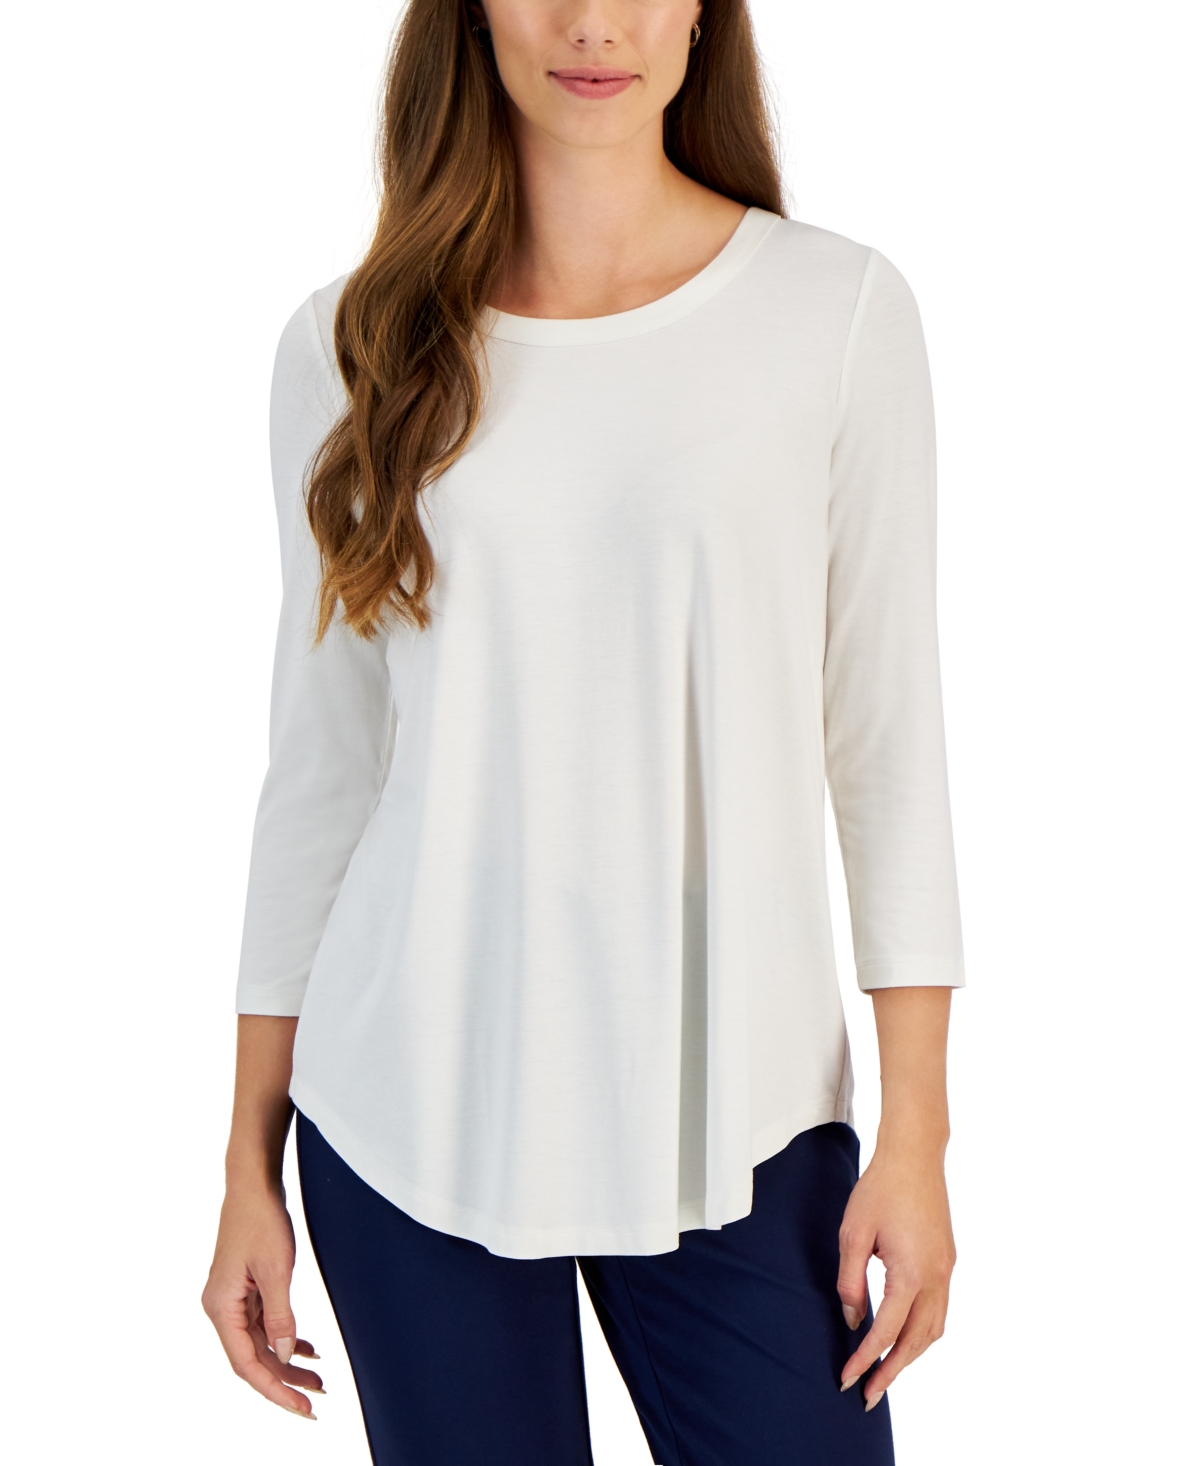 Petite Satin-Trim 3/4-Sleeve Top, Created for Macy's - Neo Natural